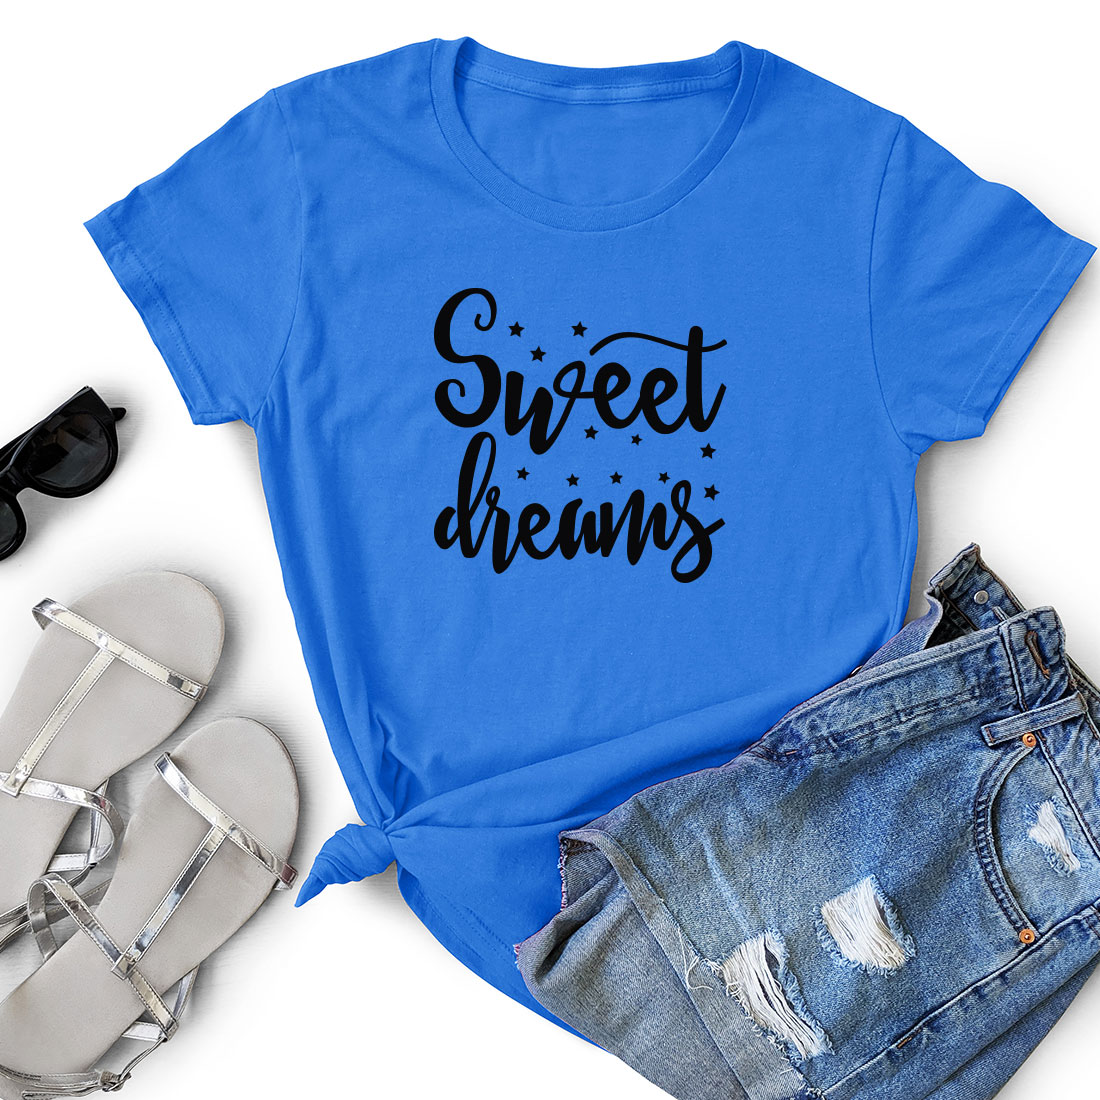 T - shirt that says sweet dreams next to a pair of shorts.